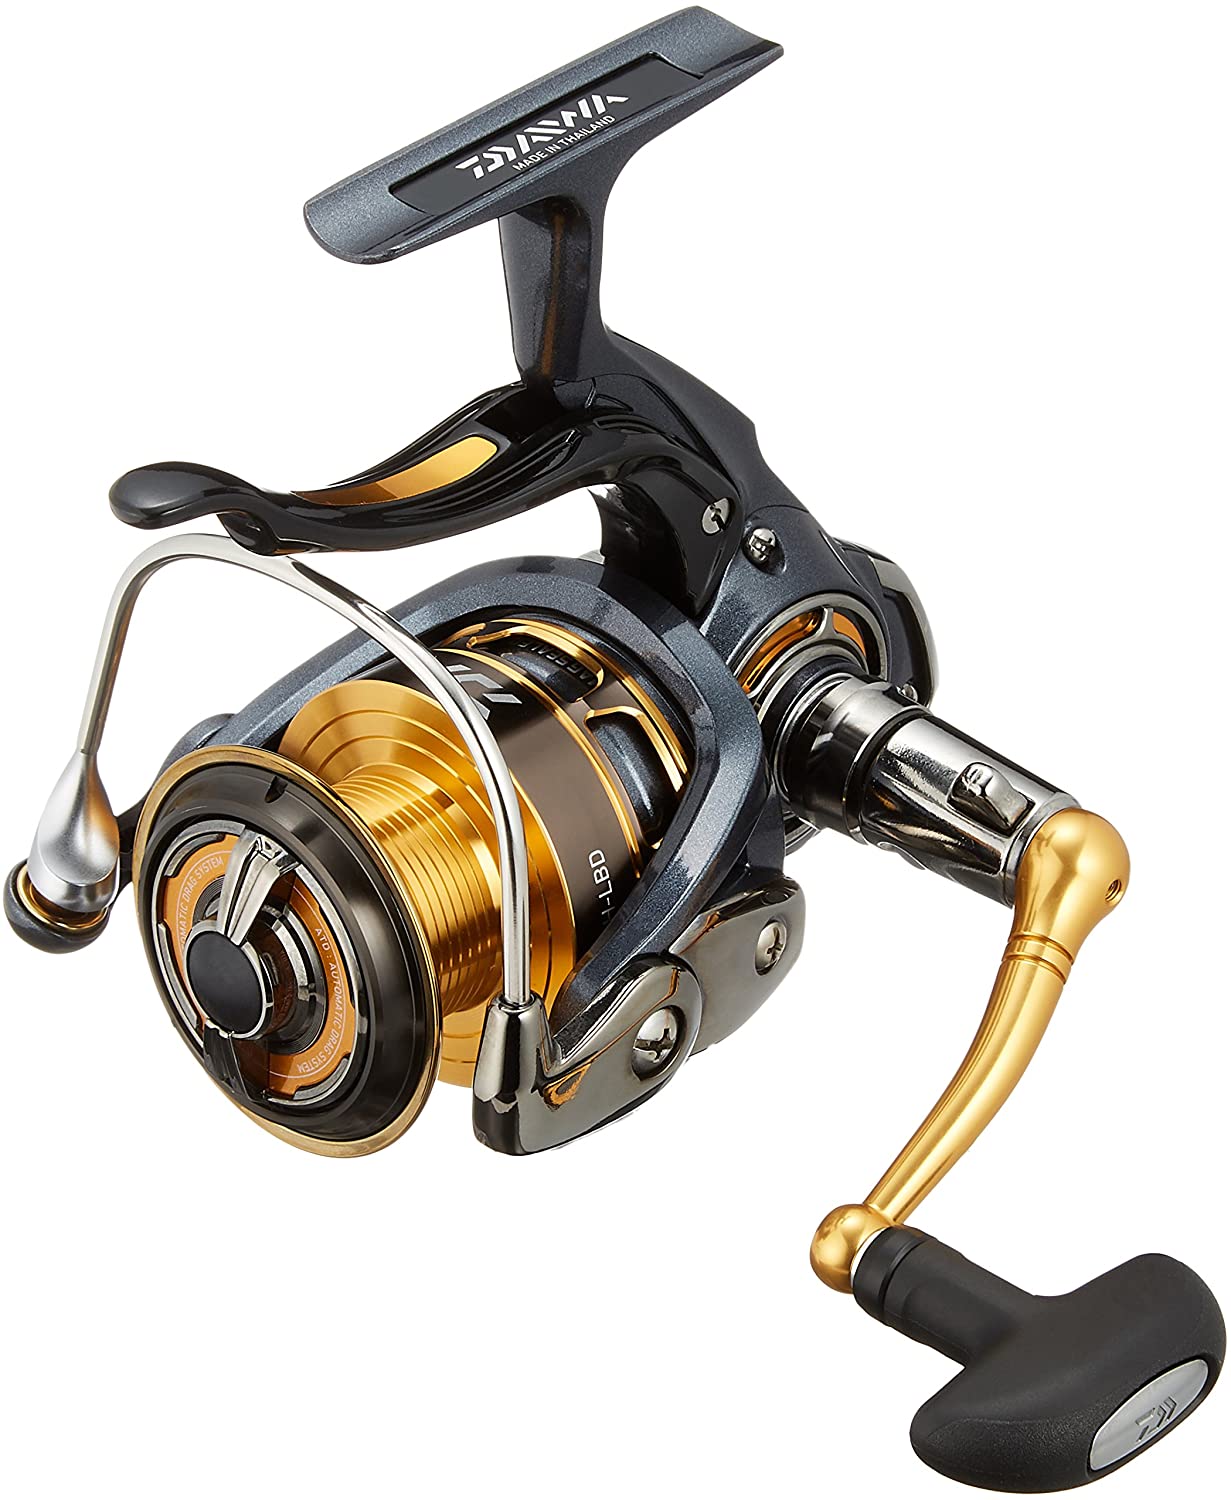 DAIWA Spinning Reel 16 Playso 3000H-LBD - Discovery Japan Mall